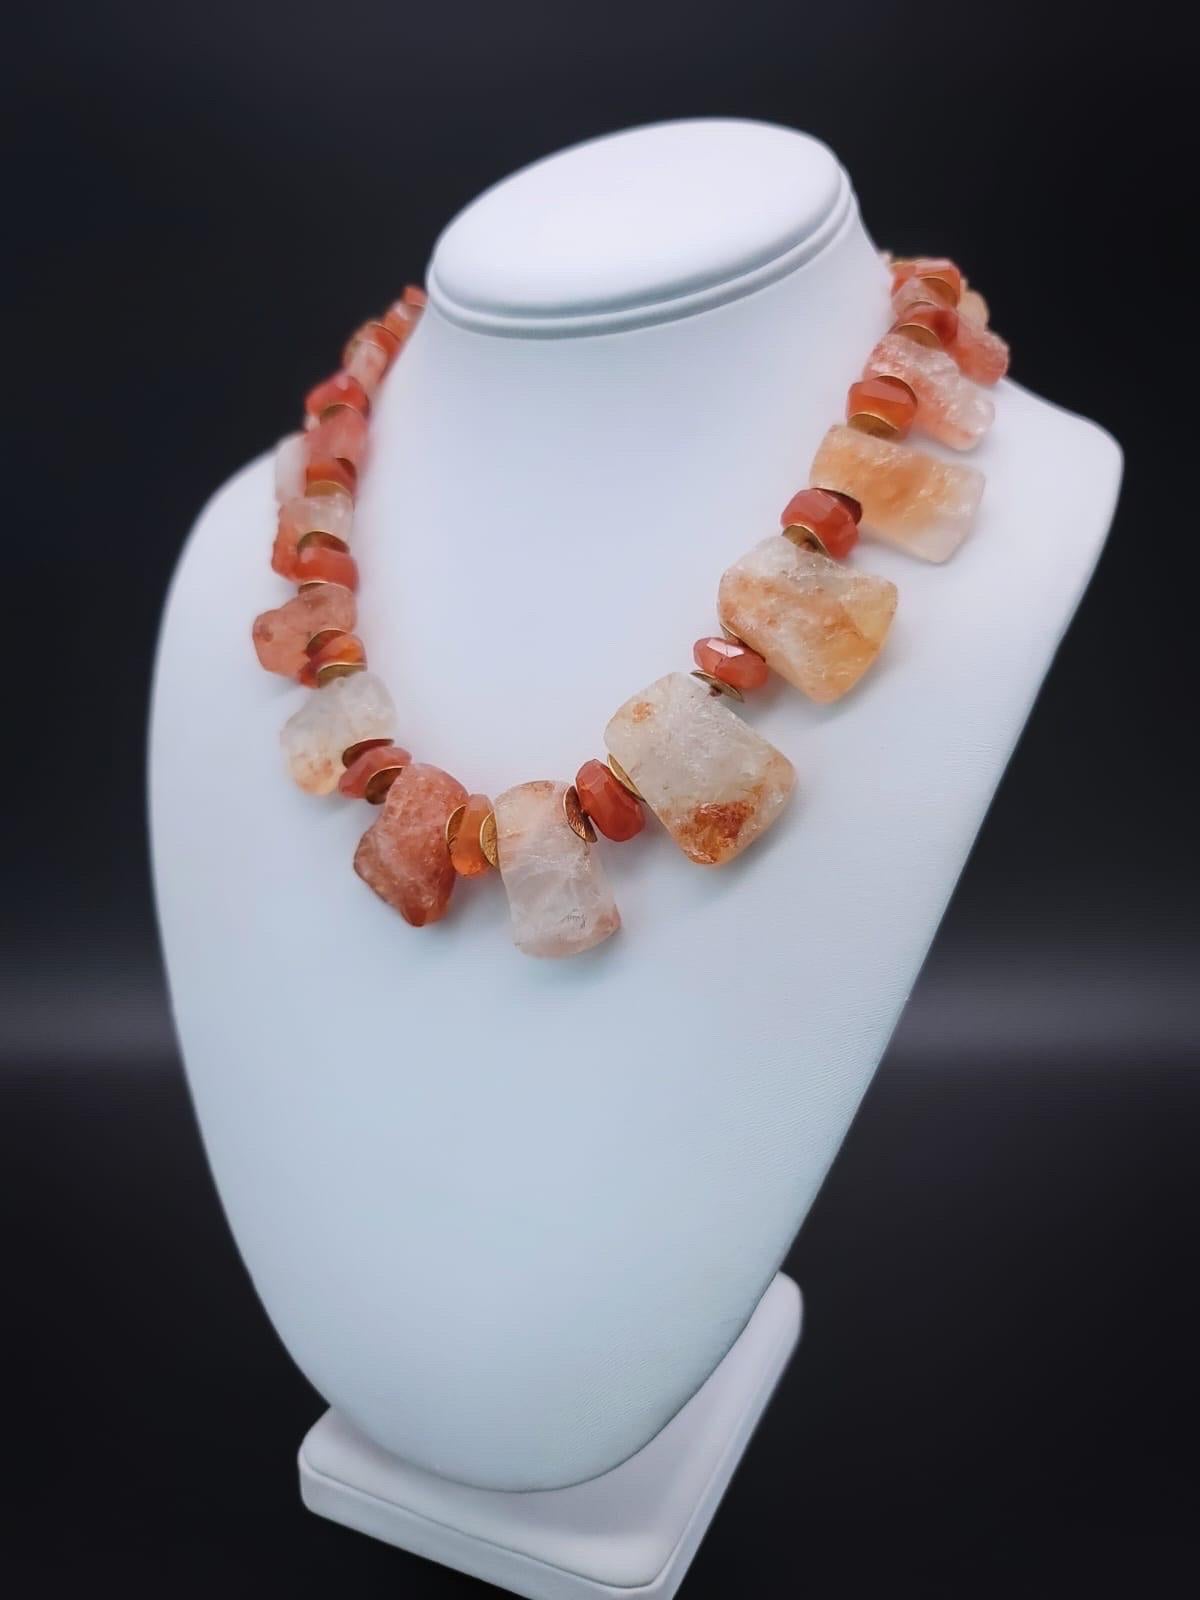 One-of-a-Kind

A sunstone crystal and carnelian single strand necklace.
Named for the distinctive colors of the sunset. These beautiful colored stones are left completely natural in various rich colors from ember glow to flame to whisper of smoke.